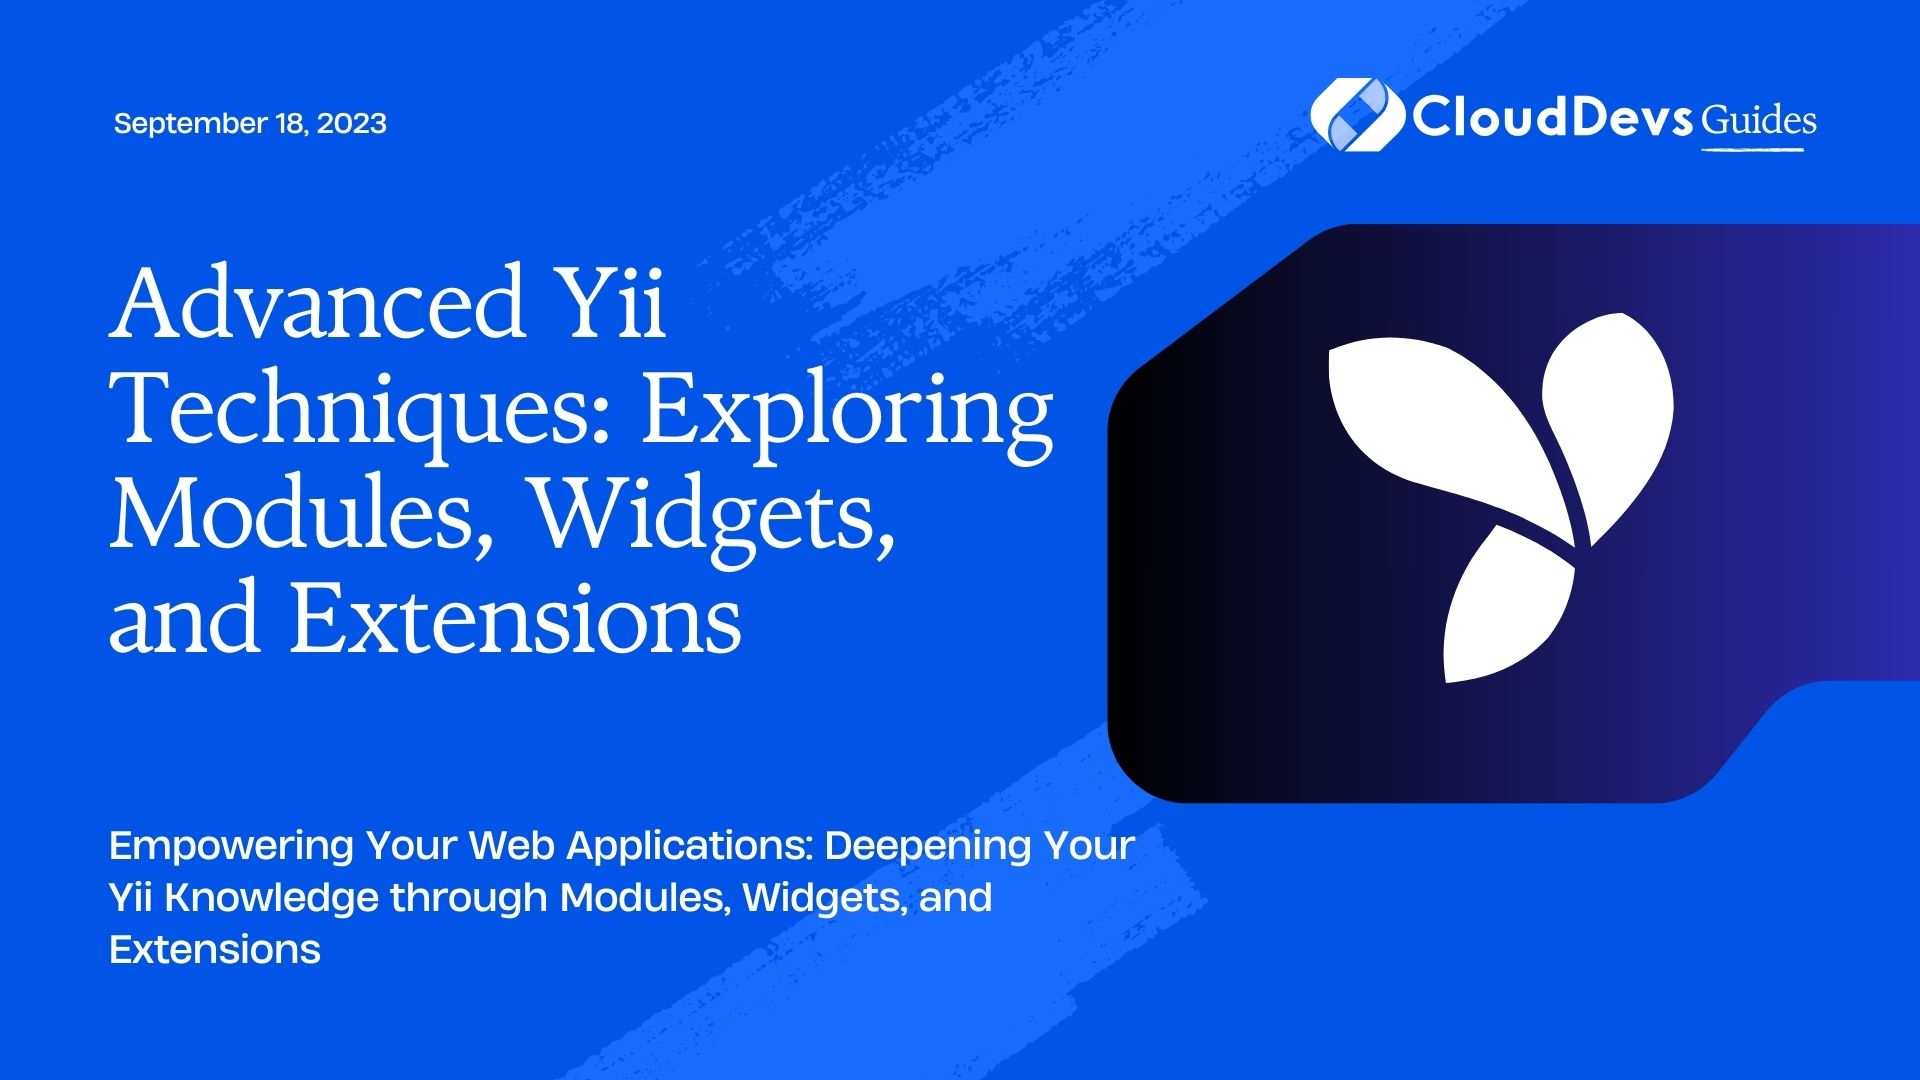 Advanced Yii Techniques: Exploring Modules, Widgets, and Extensions